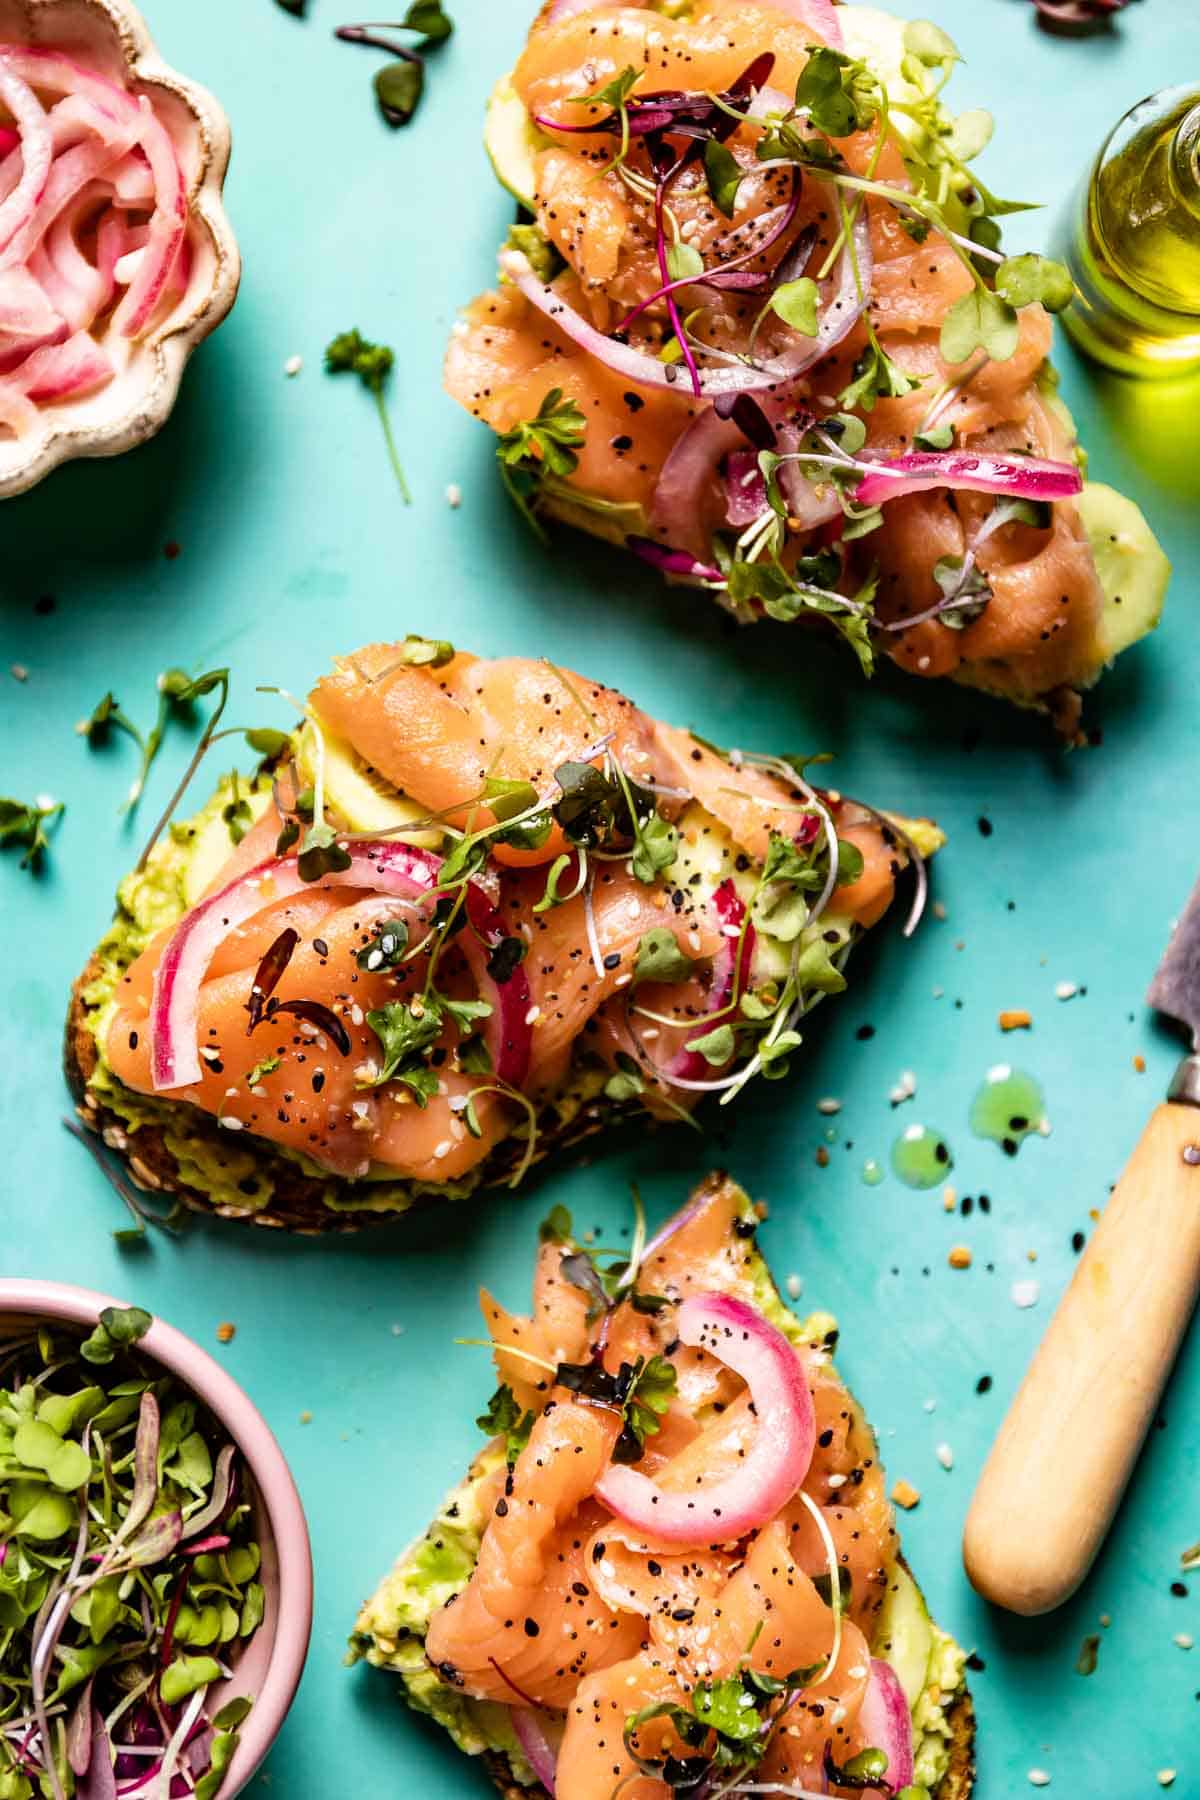 Smoked Salmon and Avocado Toast garnished with red onion and micro greens from the top view.